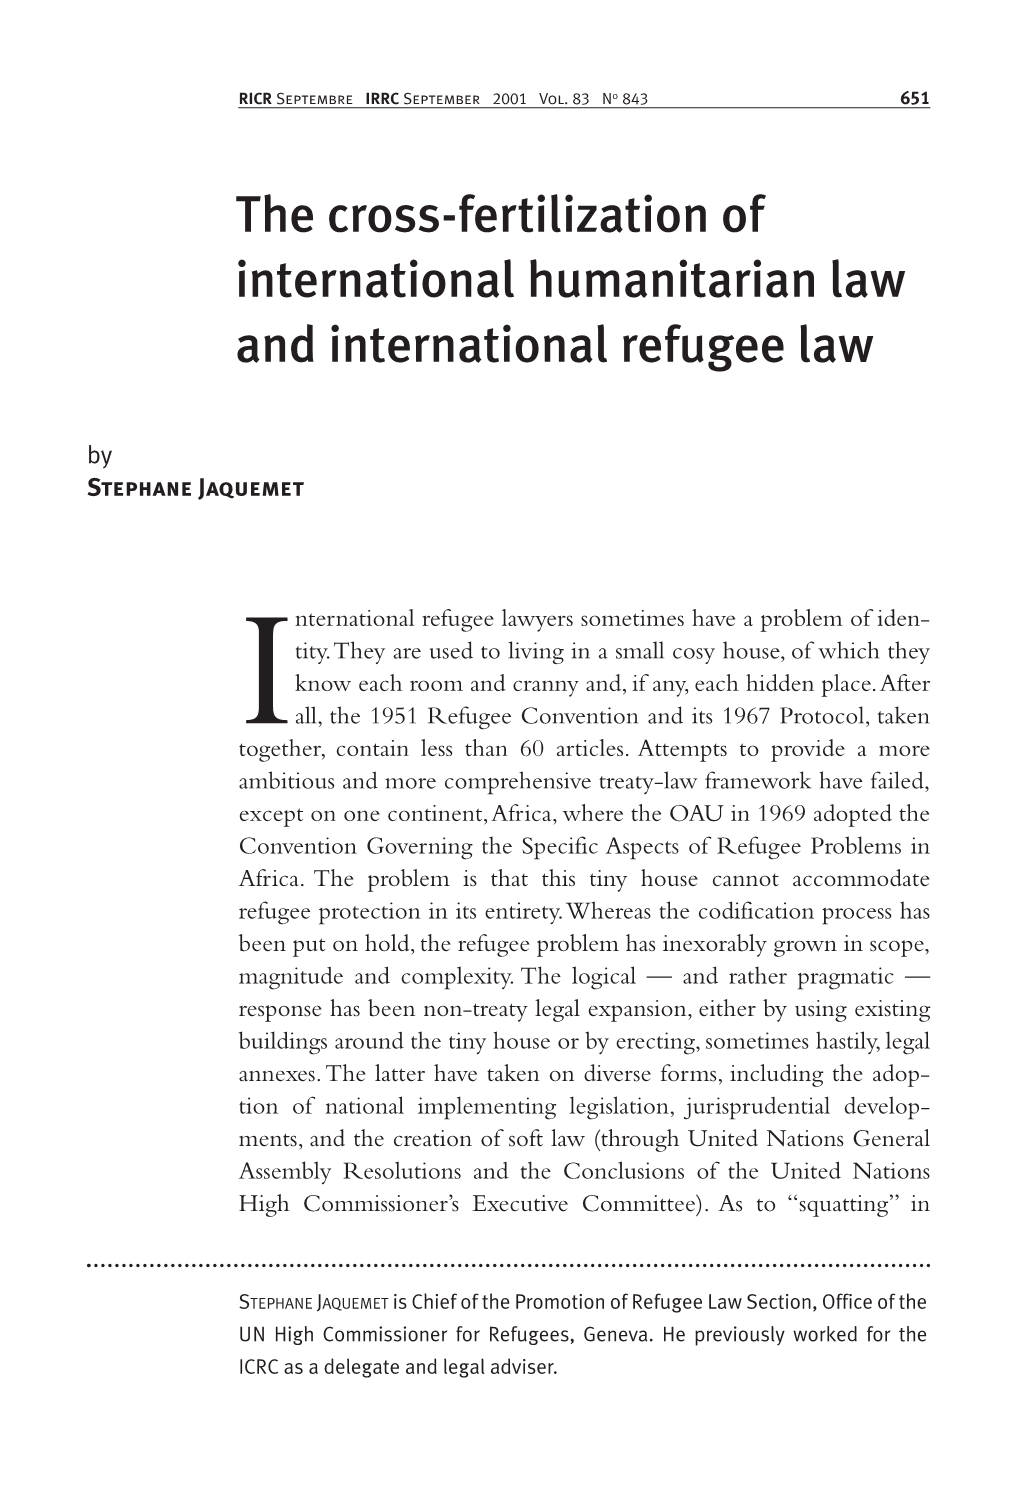 The Cross-Fertilization of International Humanitarian Law and International Refugee Law by Stephane Jaquemet